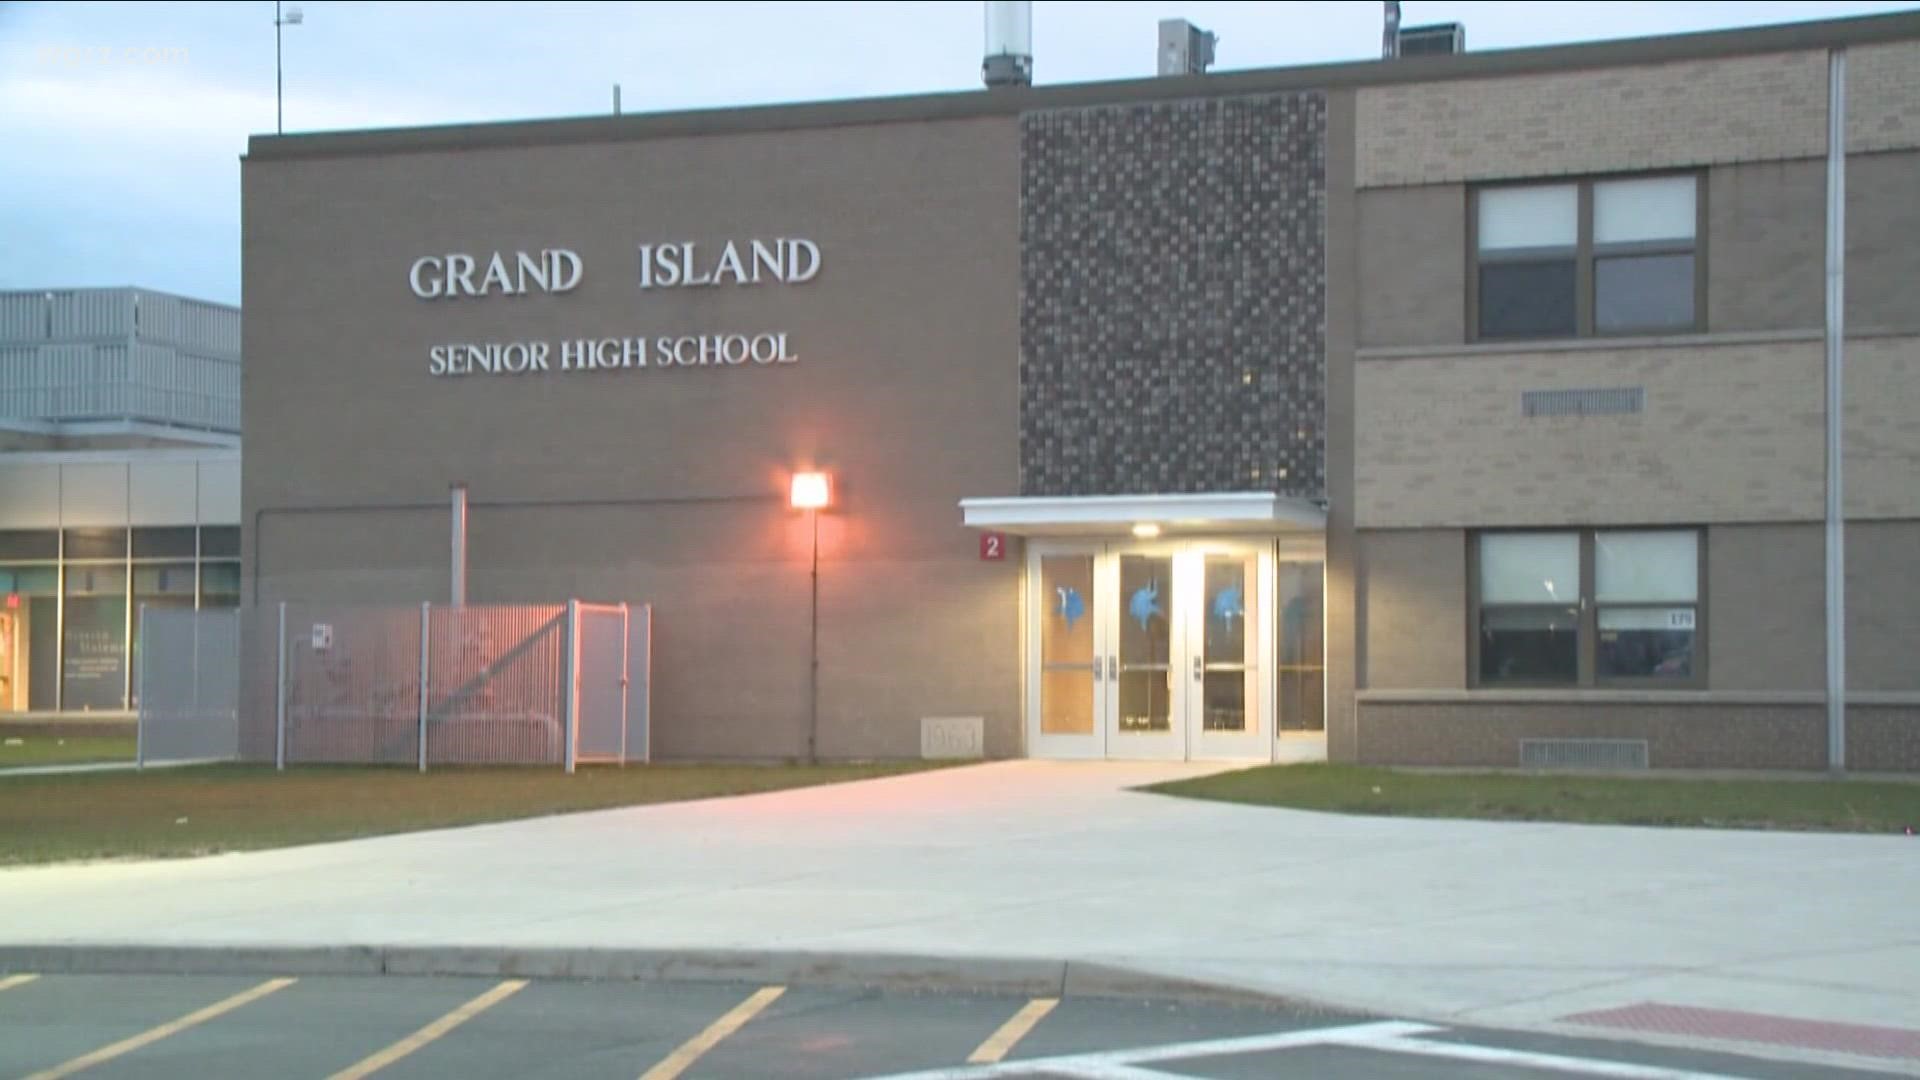 Schools across the country are dealing with threats of violence being made on social media, leading to cancelled classes, even to several schools in WNY.